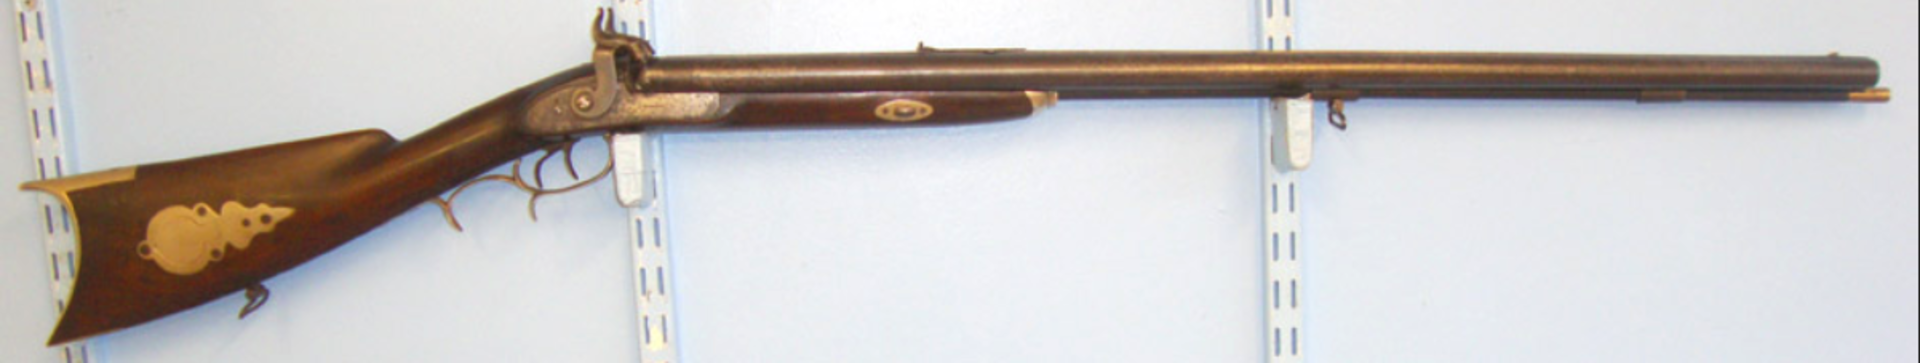 QUALITY American Civil War Era Double Barrelled .44” Patched Ball Calibre Kentucky Plains Rifle - Image 2 of 3